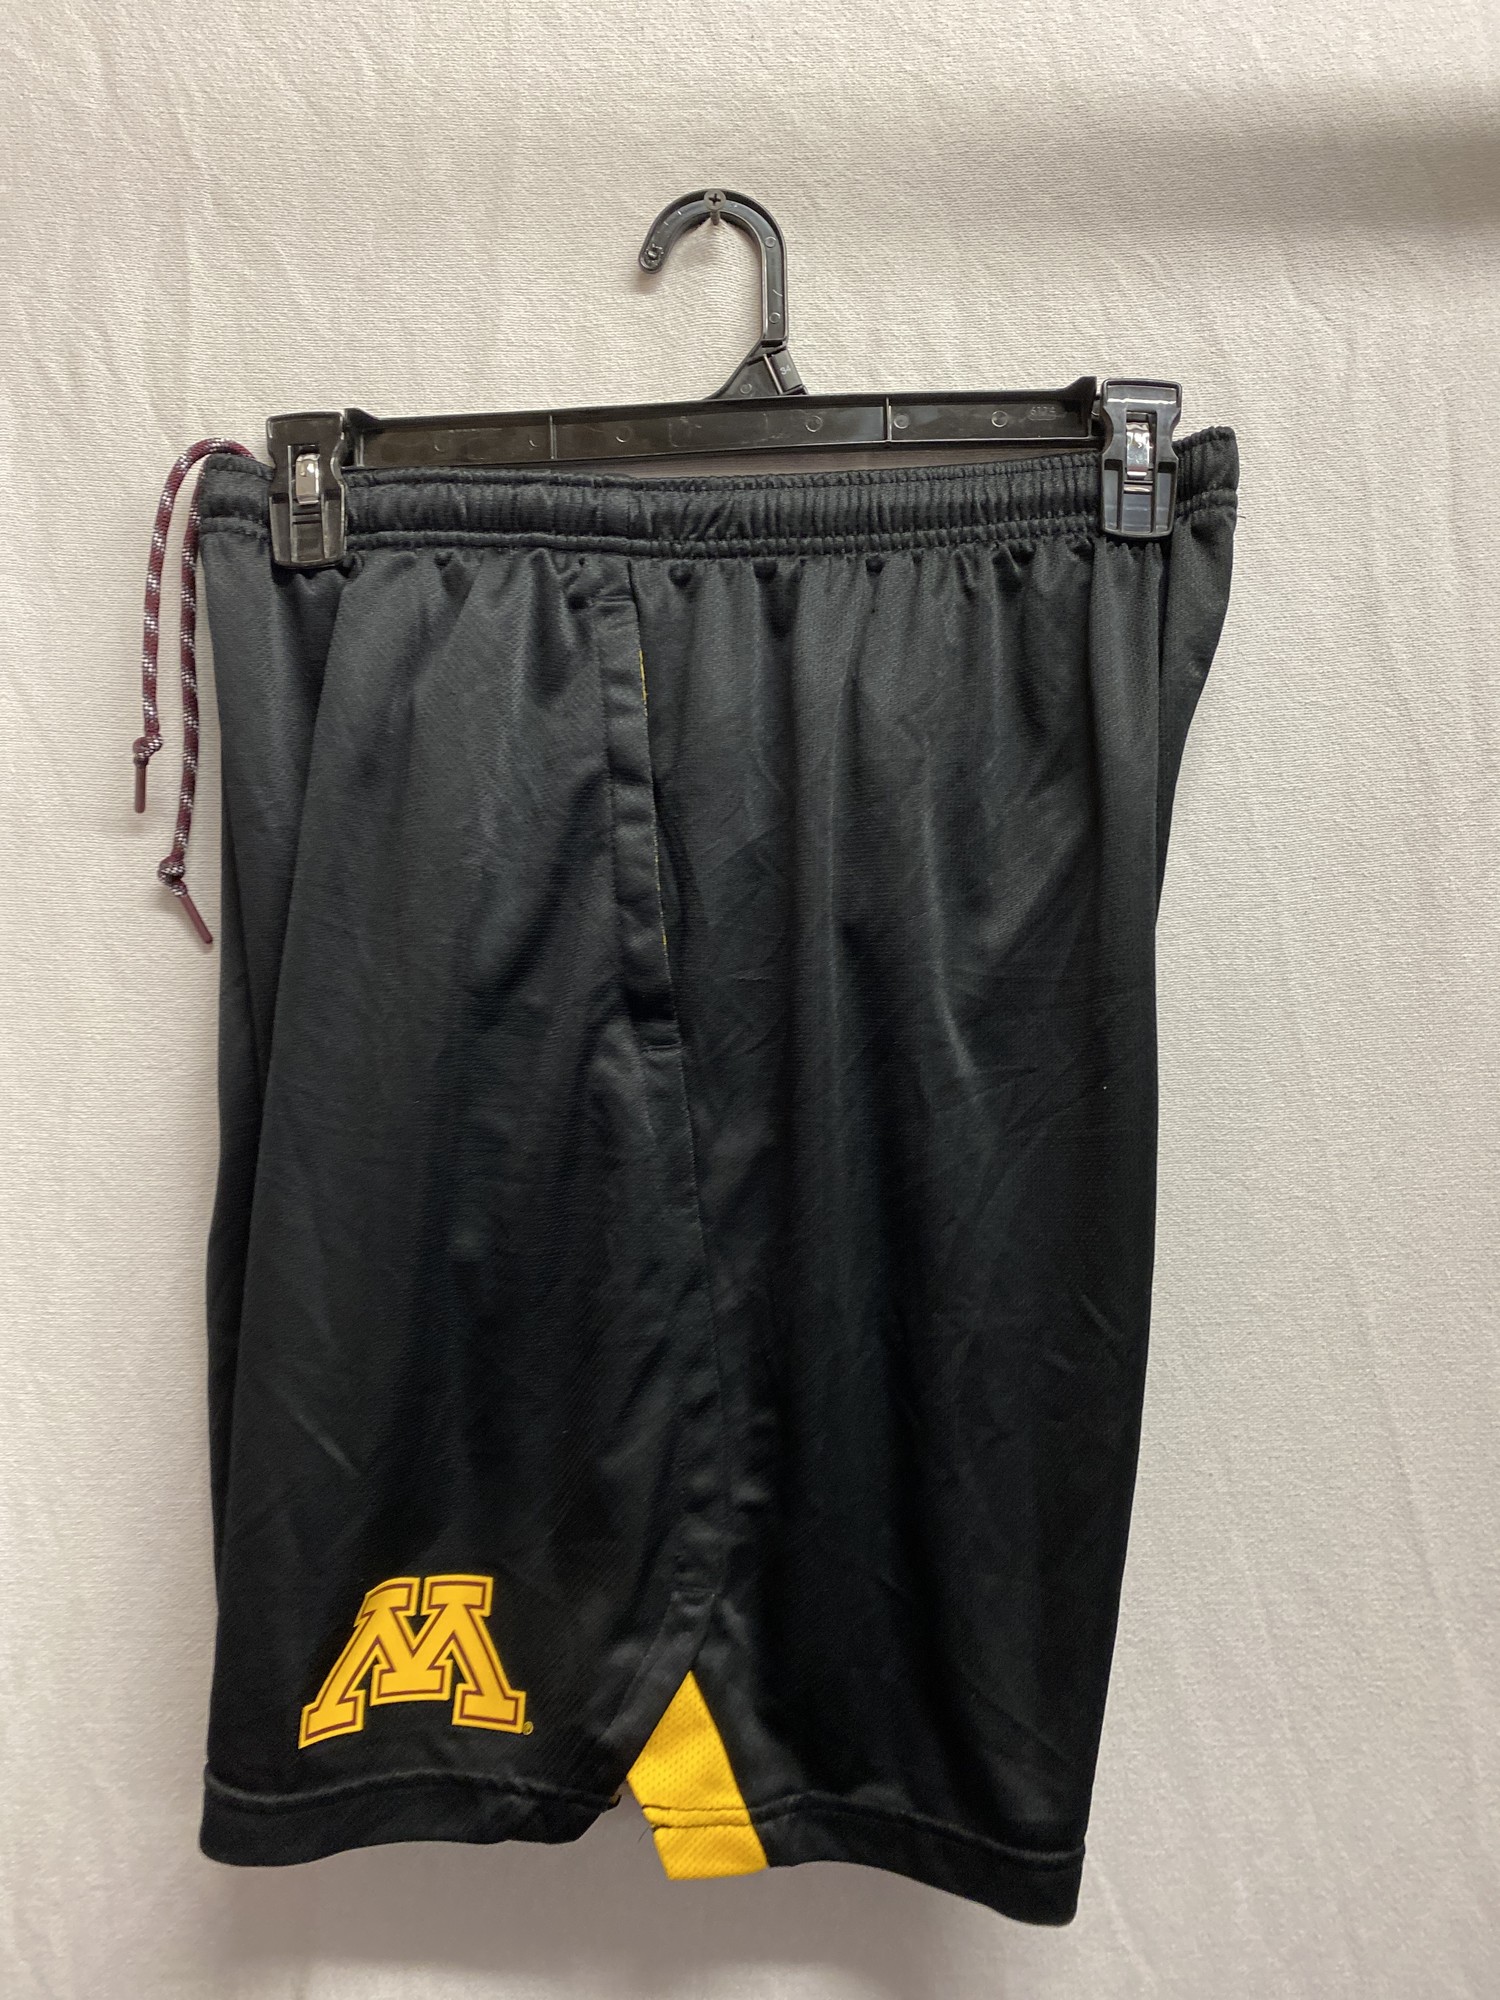 Minn Gophers Shorts, Black, Size: XL
used condition - some snags, some light stains (white marks), piling and fuzz,
pockets- yes (3)